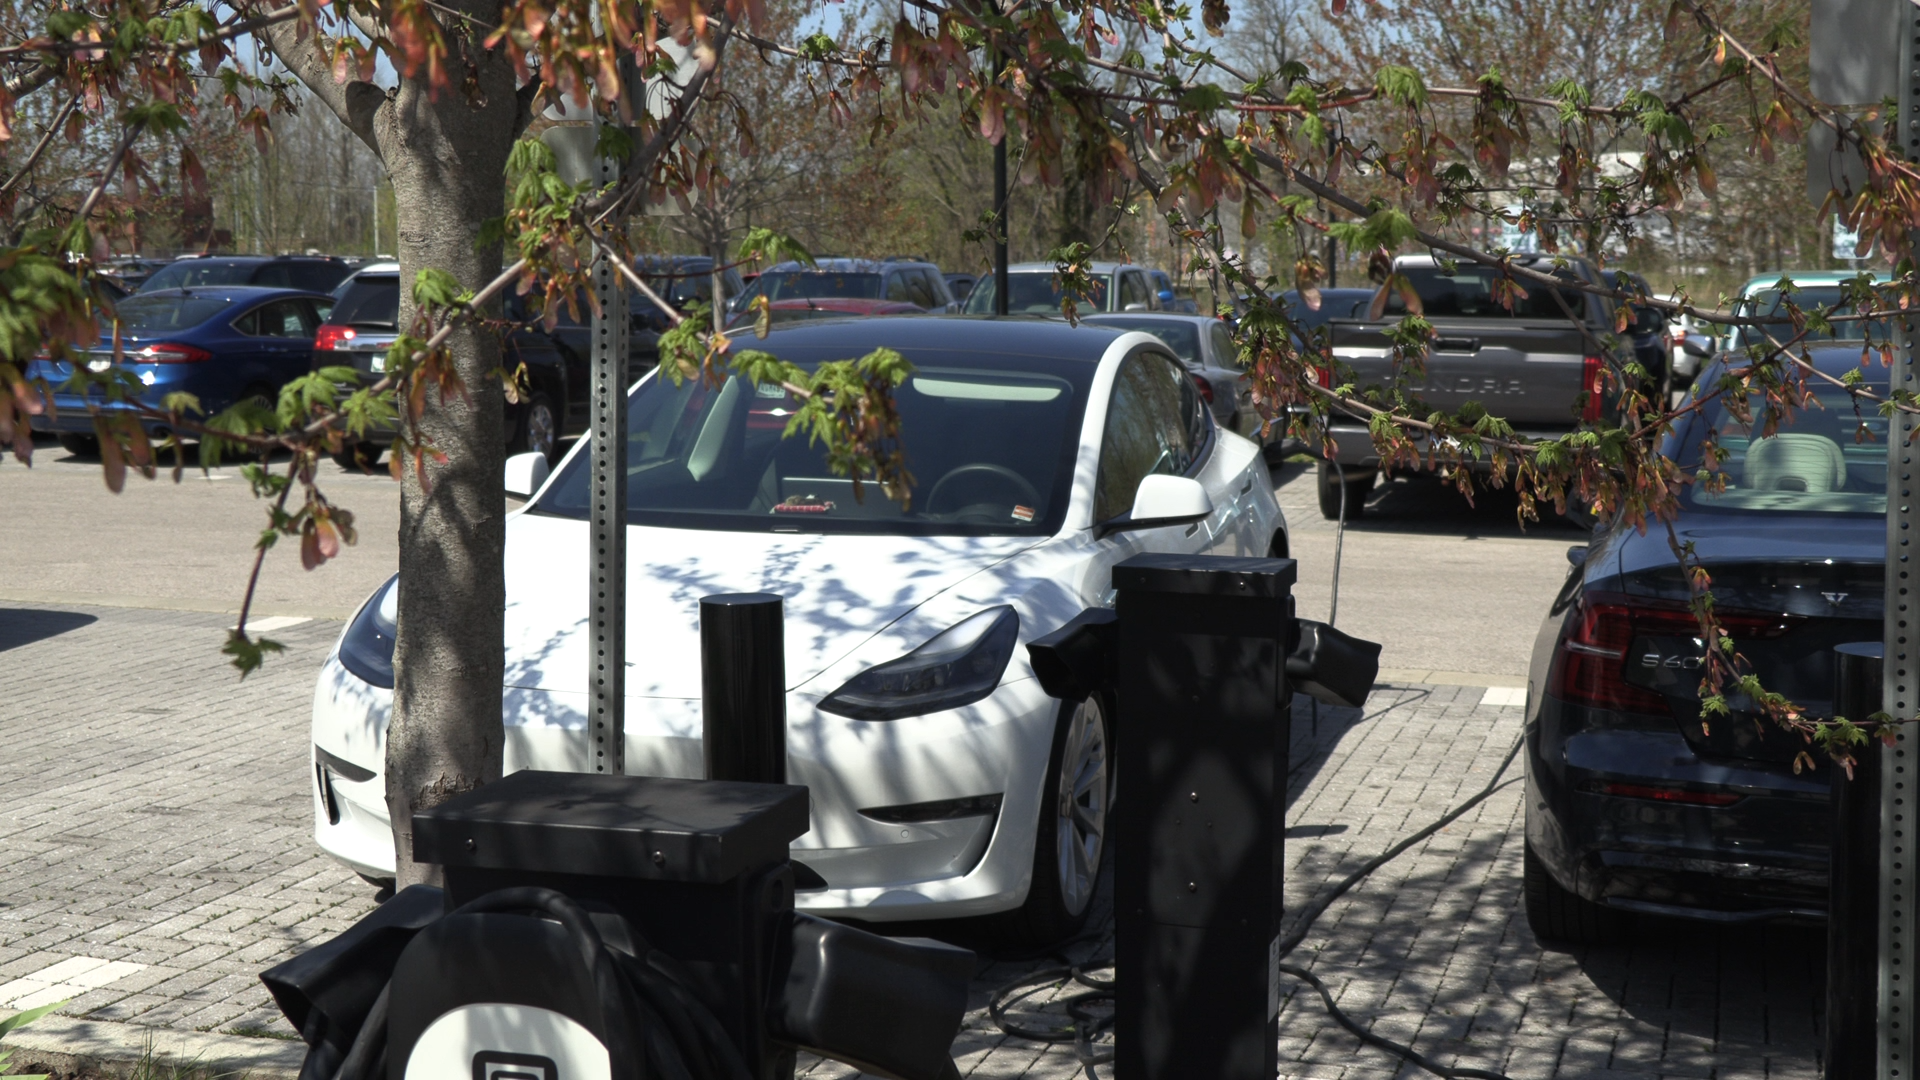 Free EV charging stations at Switchyard Park changed to metered stations